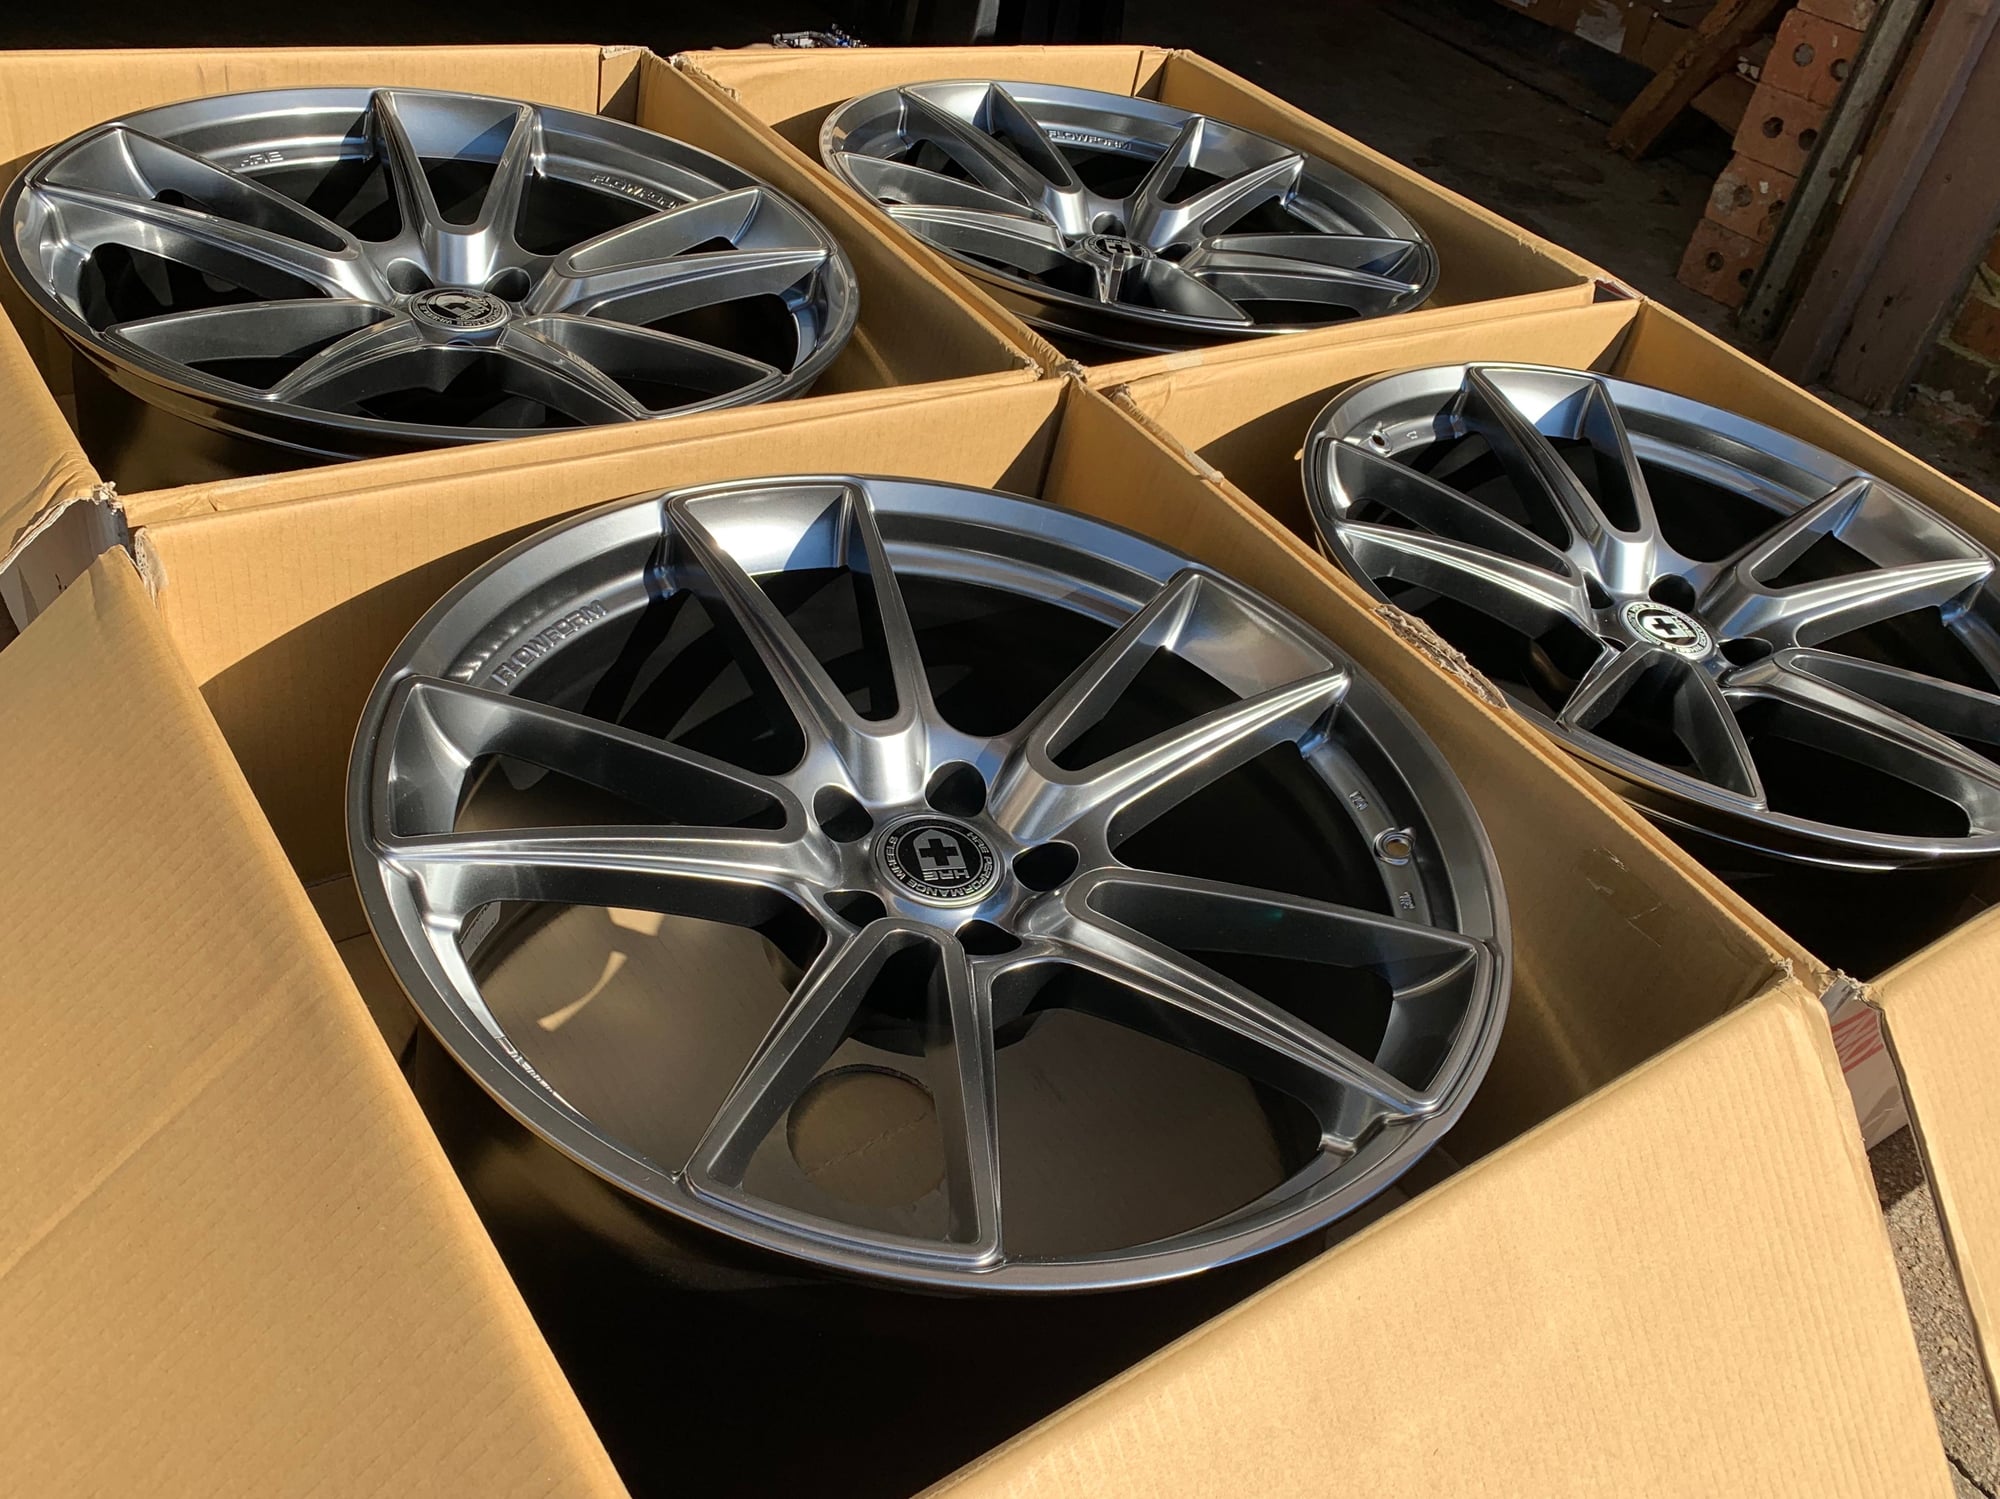 Wheels and Tires/Axles - HRE FF04 20x10.5 5x112 et35 - New - All Years Any Make All Models - Lithonia, GA 30038, United States